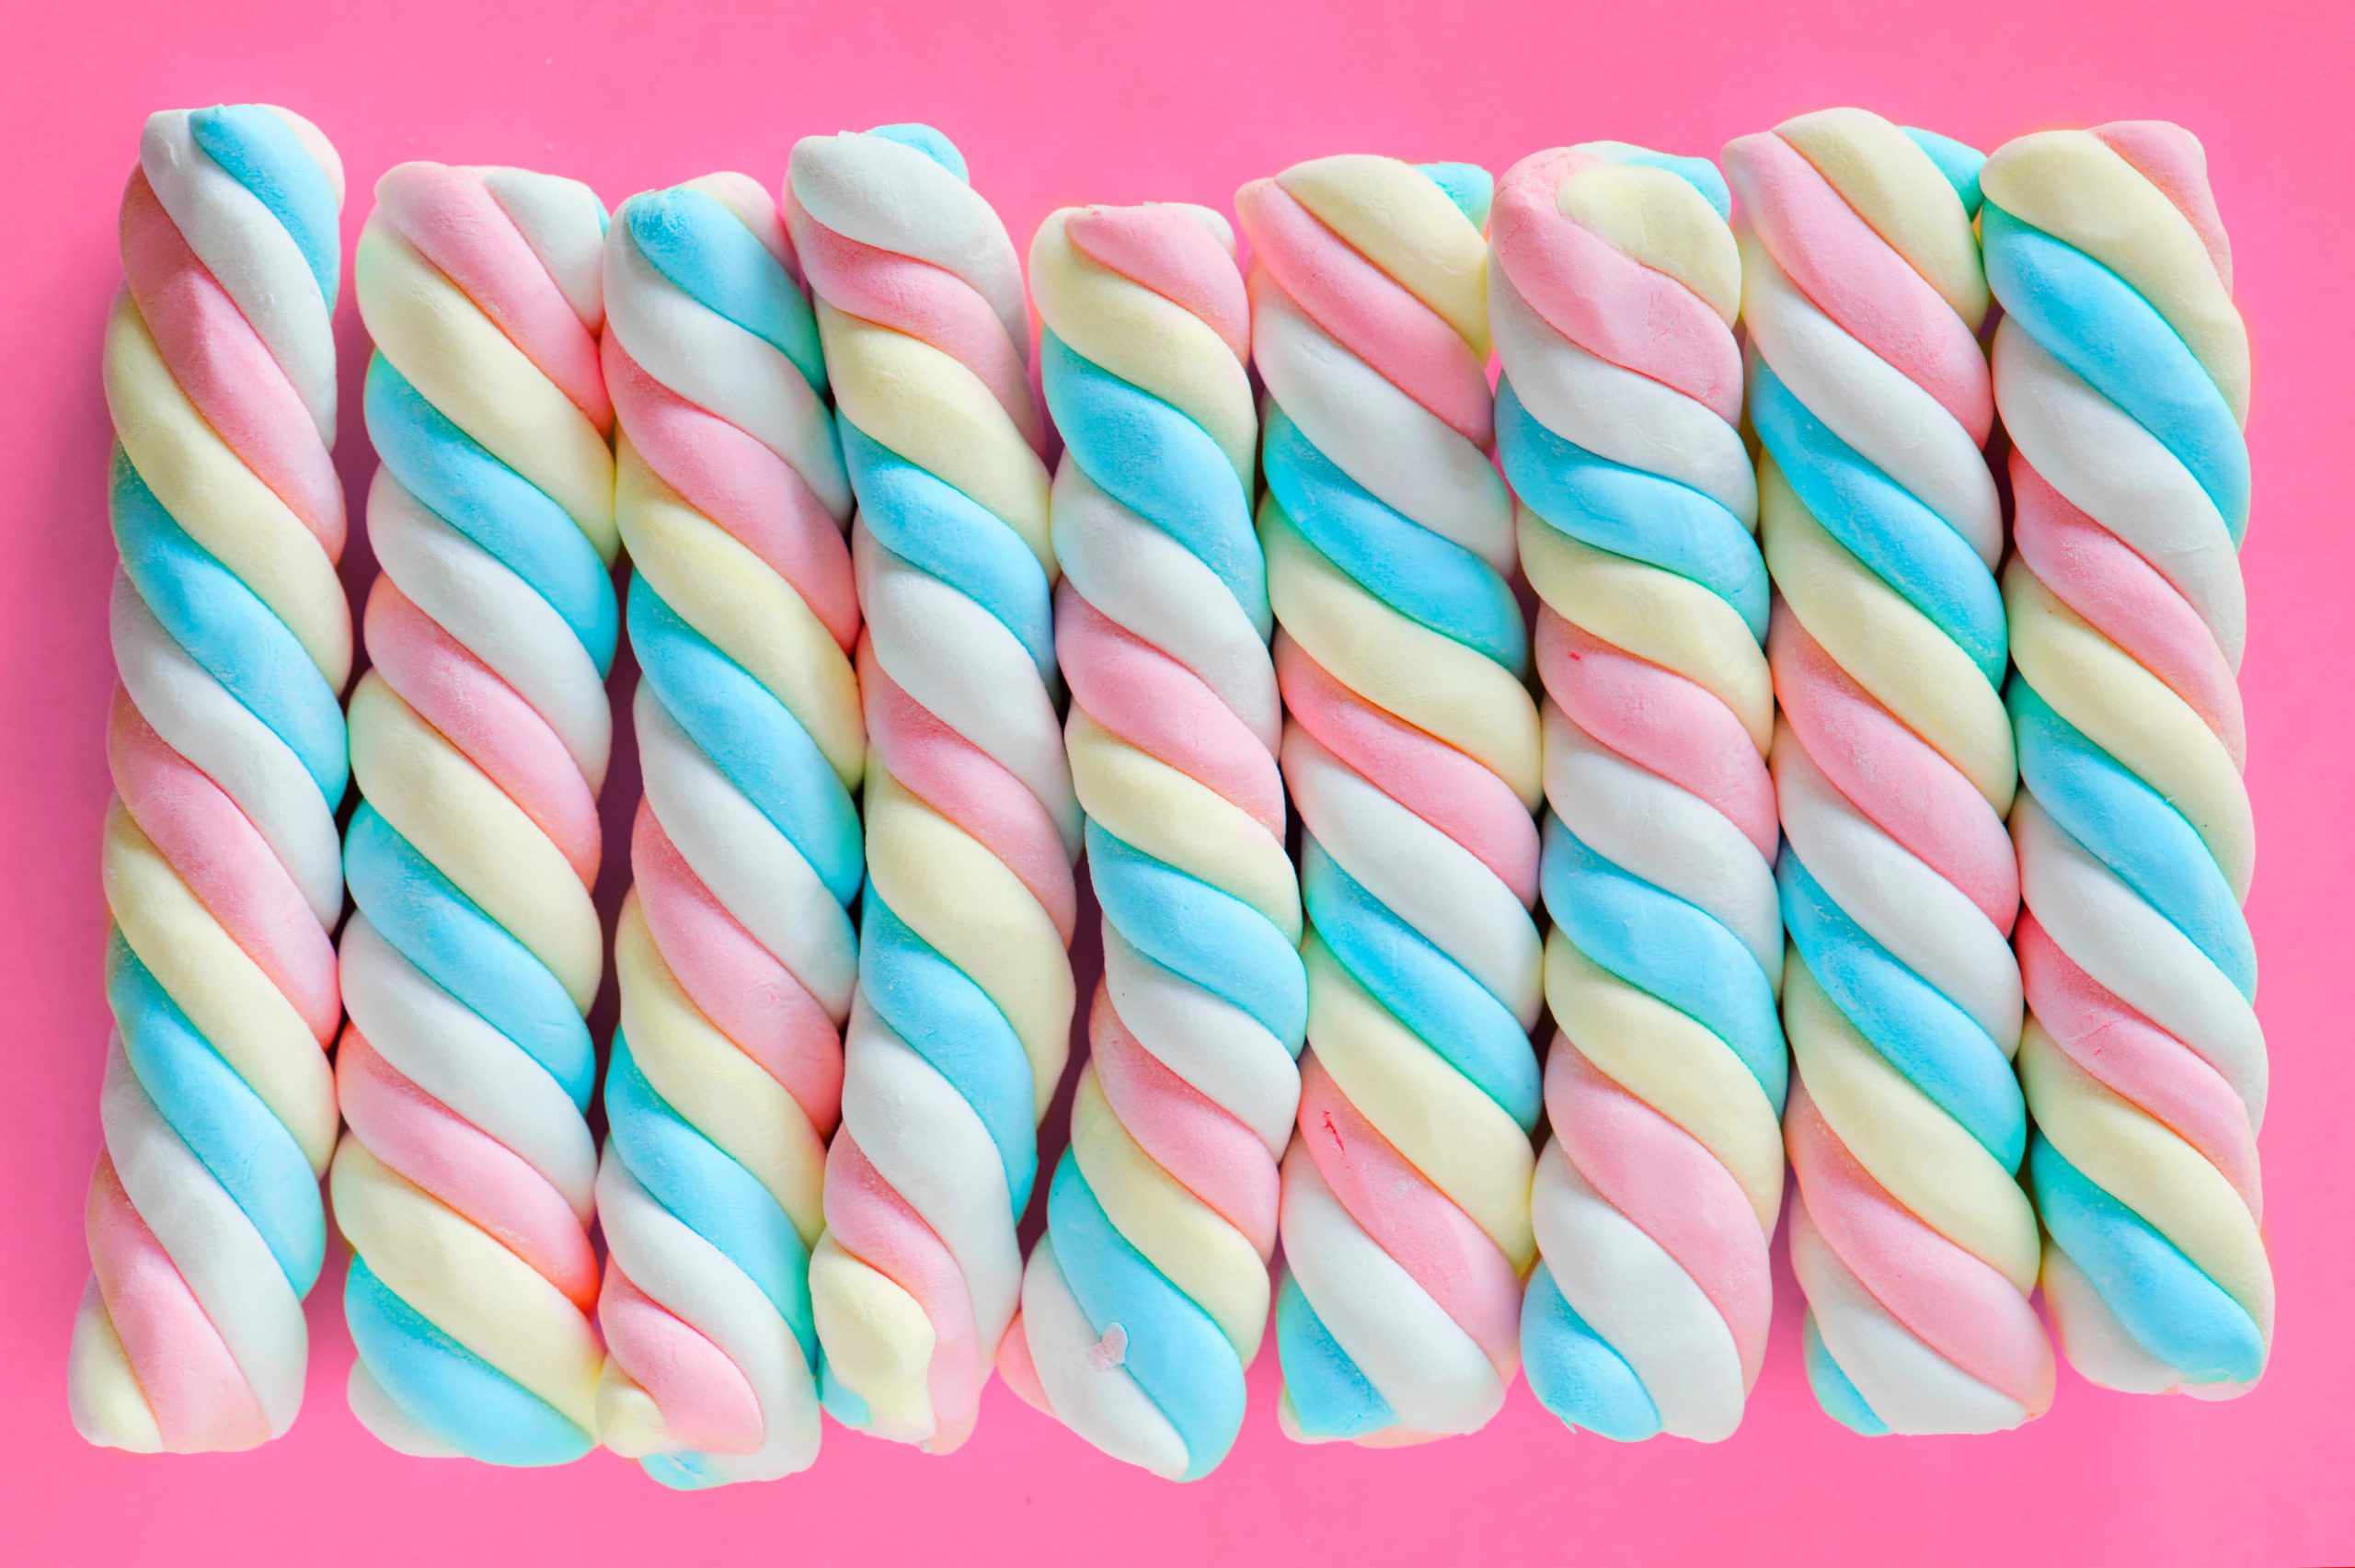 Candyroll wallpaper, American, background, candy, chewy, closeup, colorful